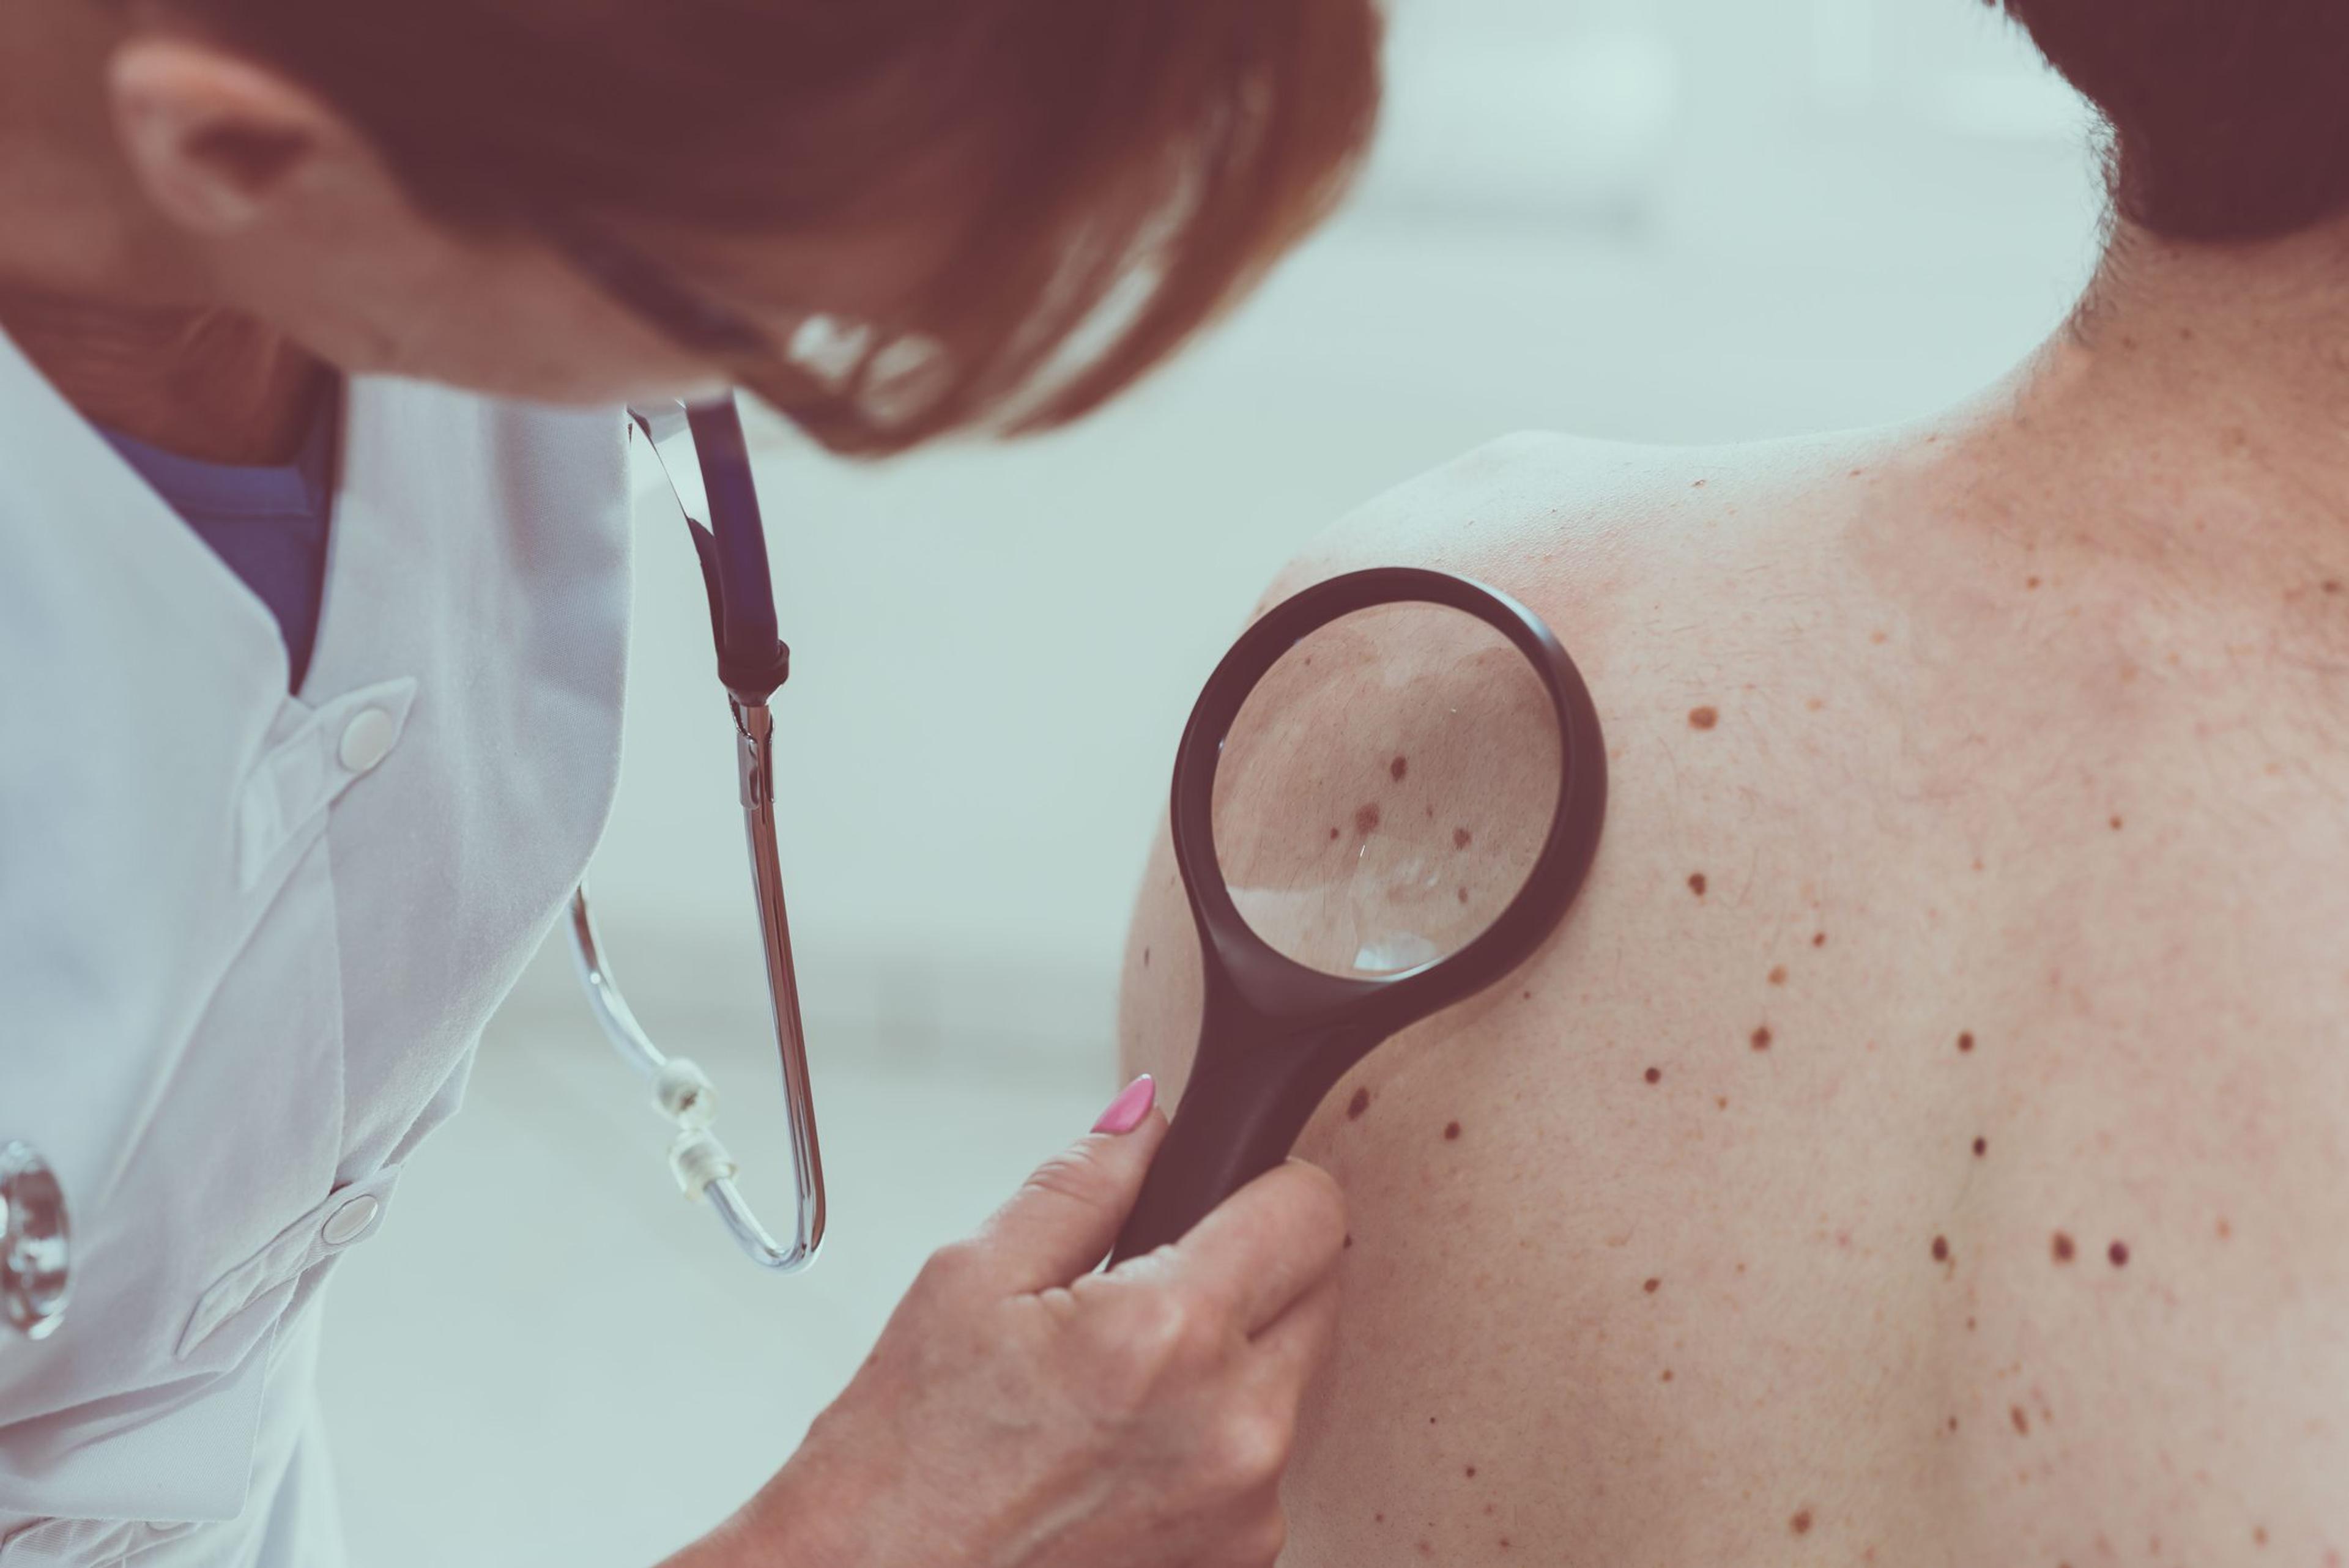 Dermatologist examining the skin of a patient looking at common sites for melanoma